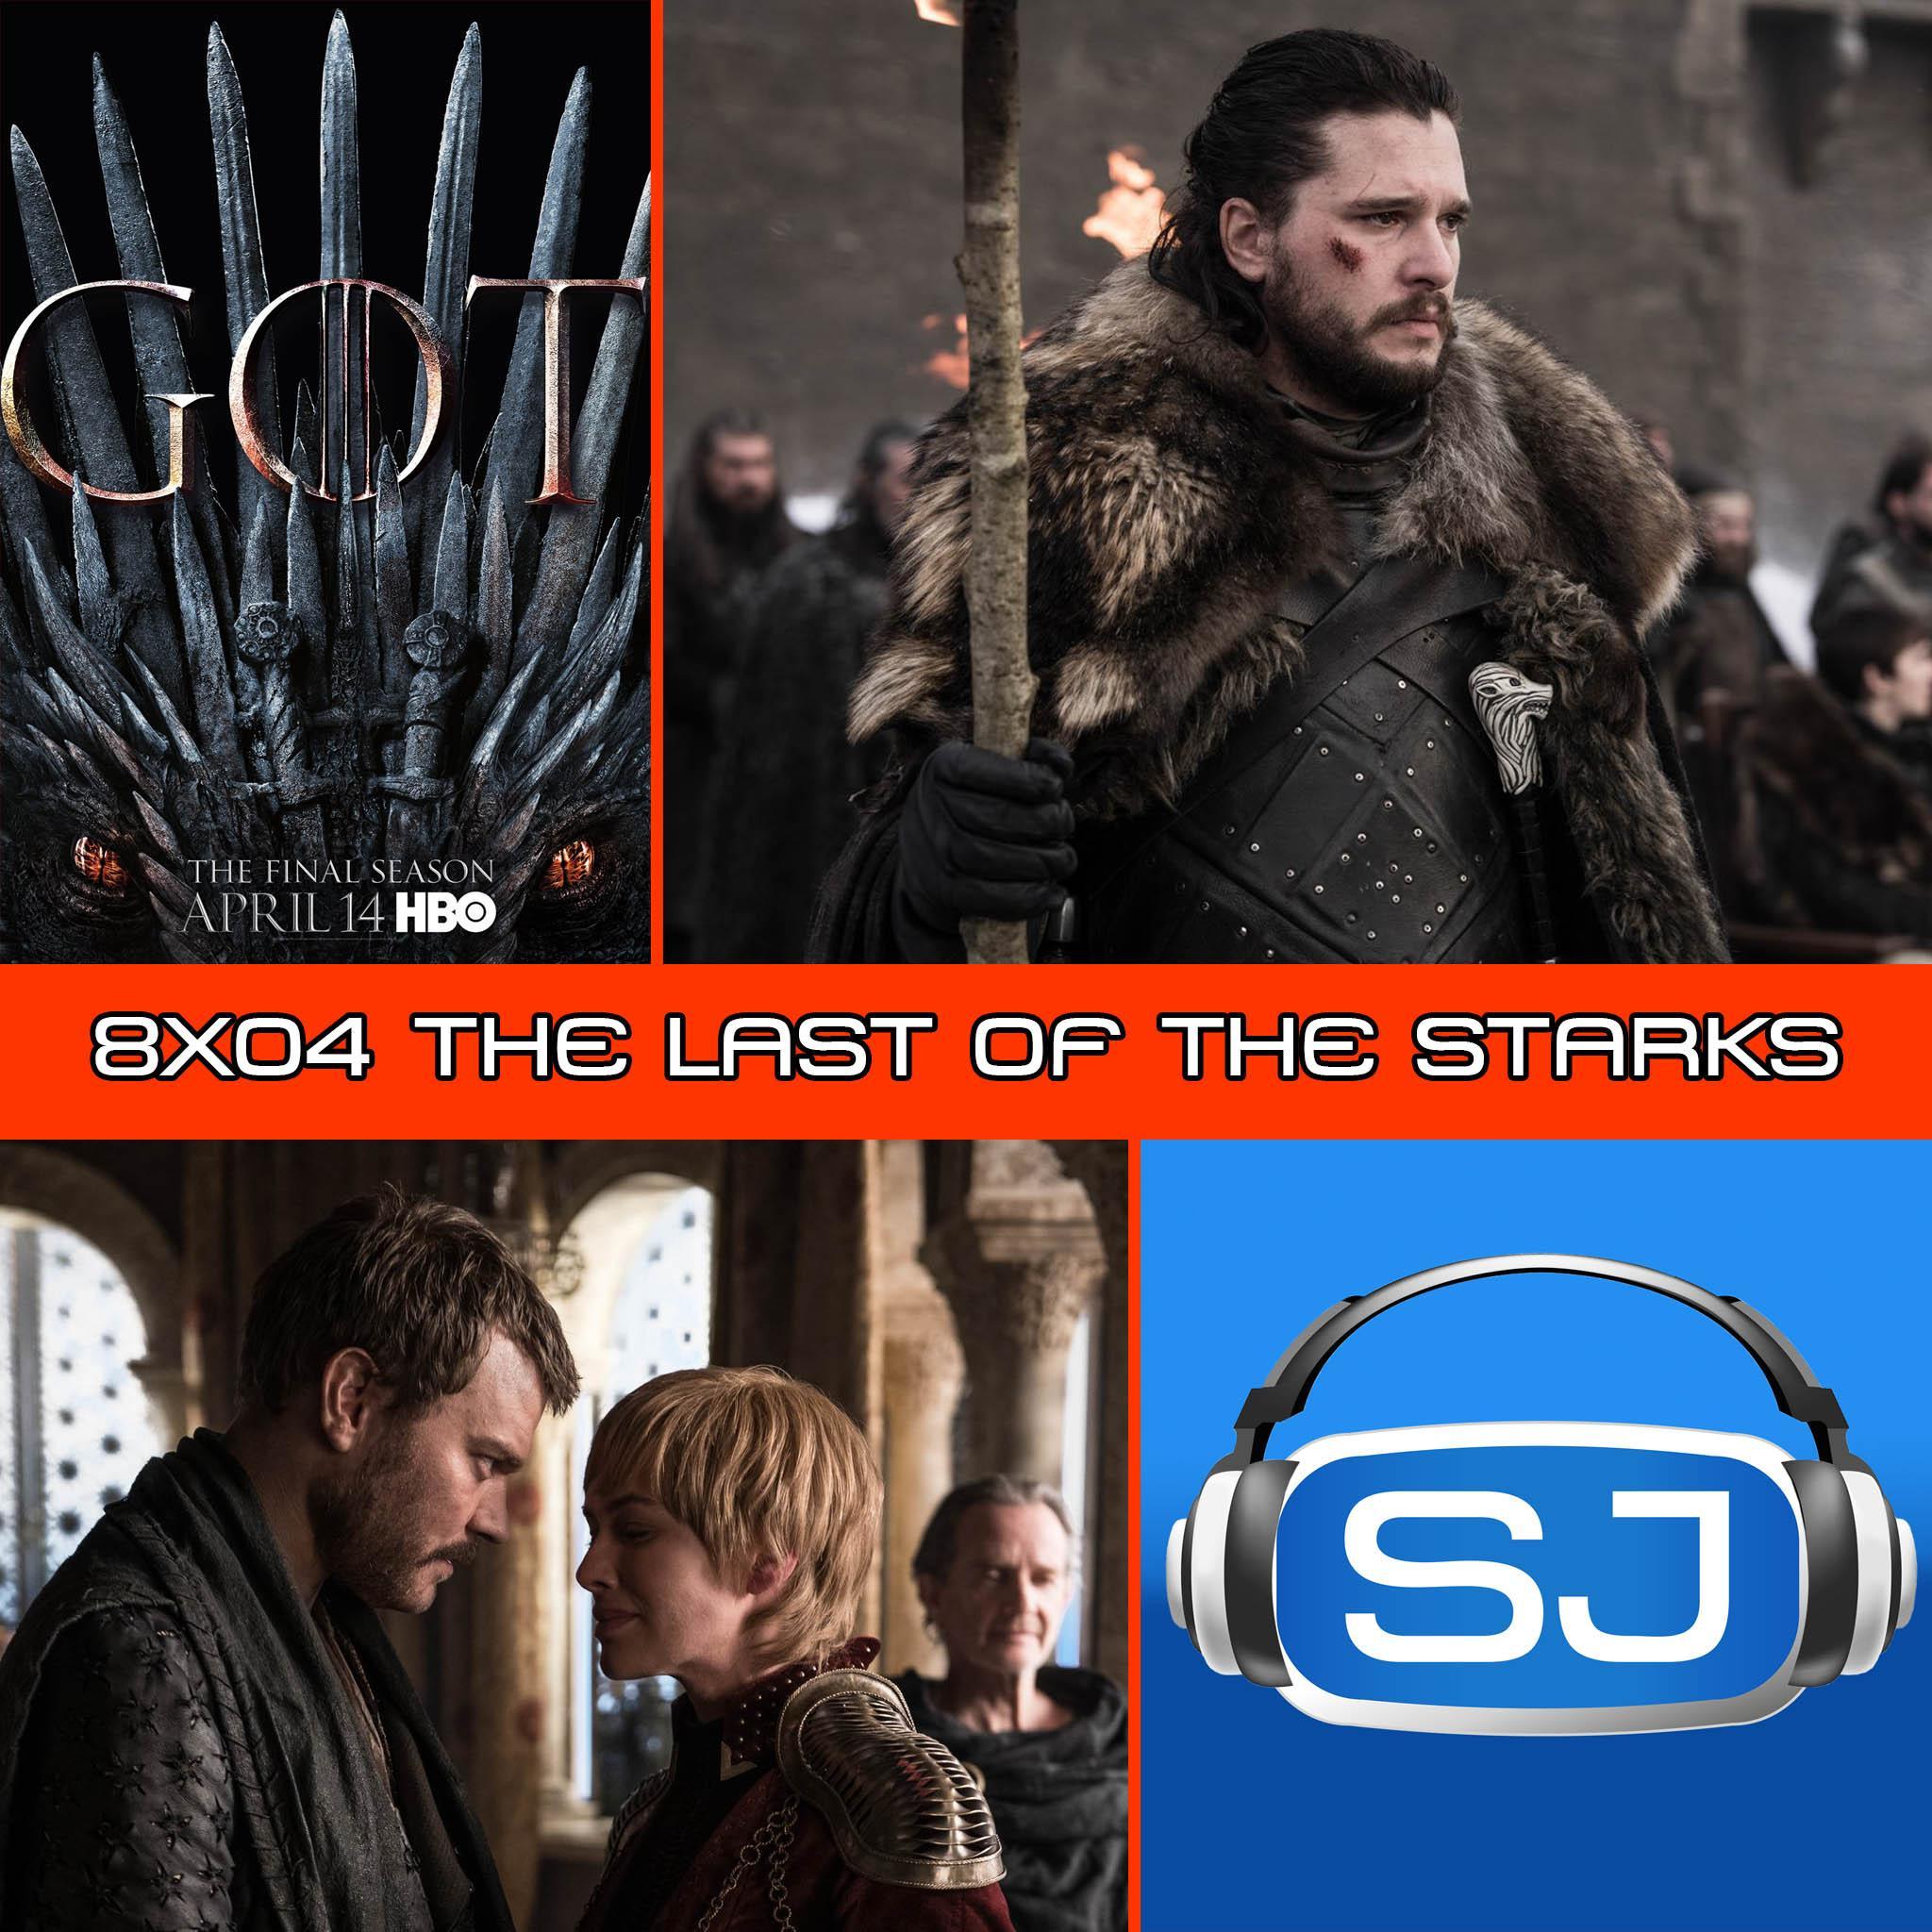 Game of Thrones 8x04 The Last of the Starks